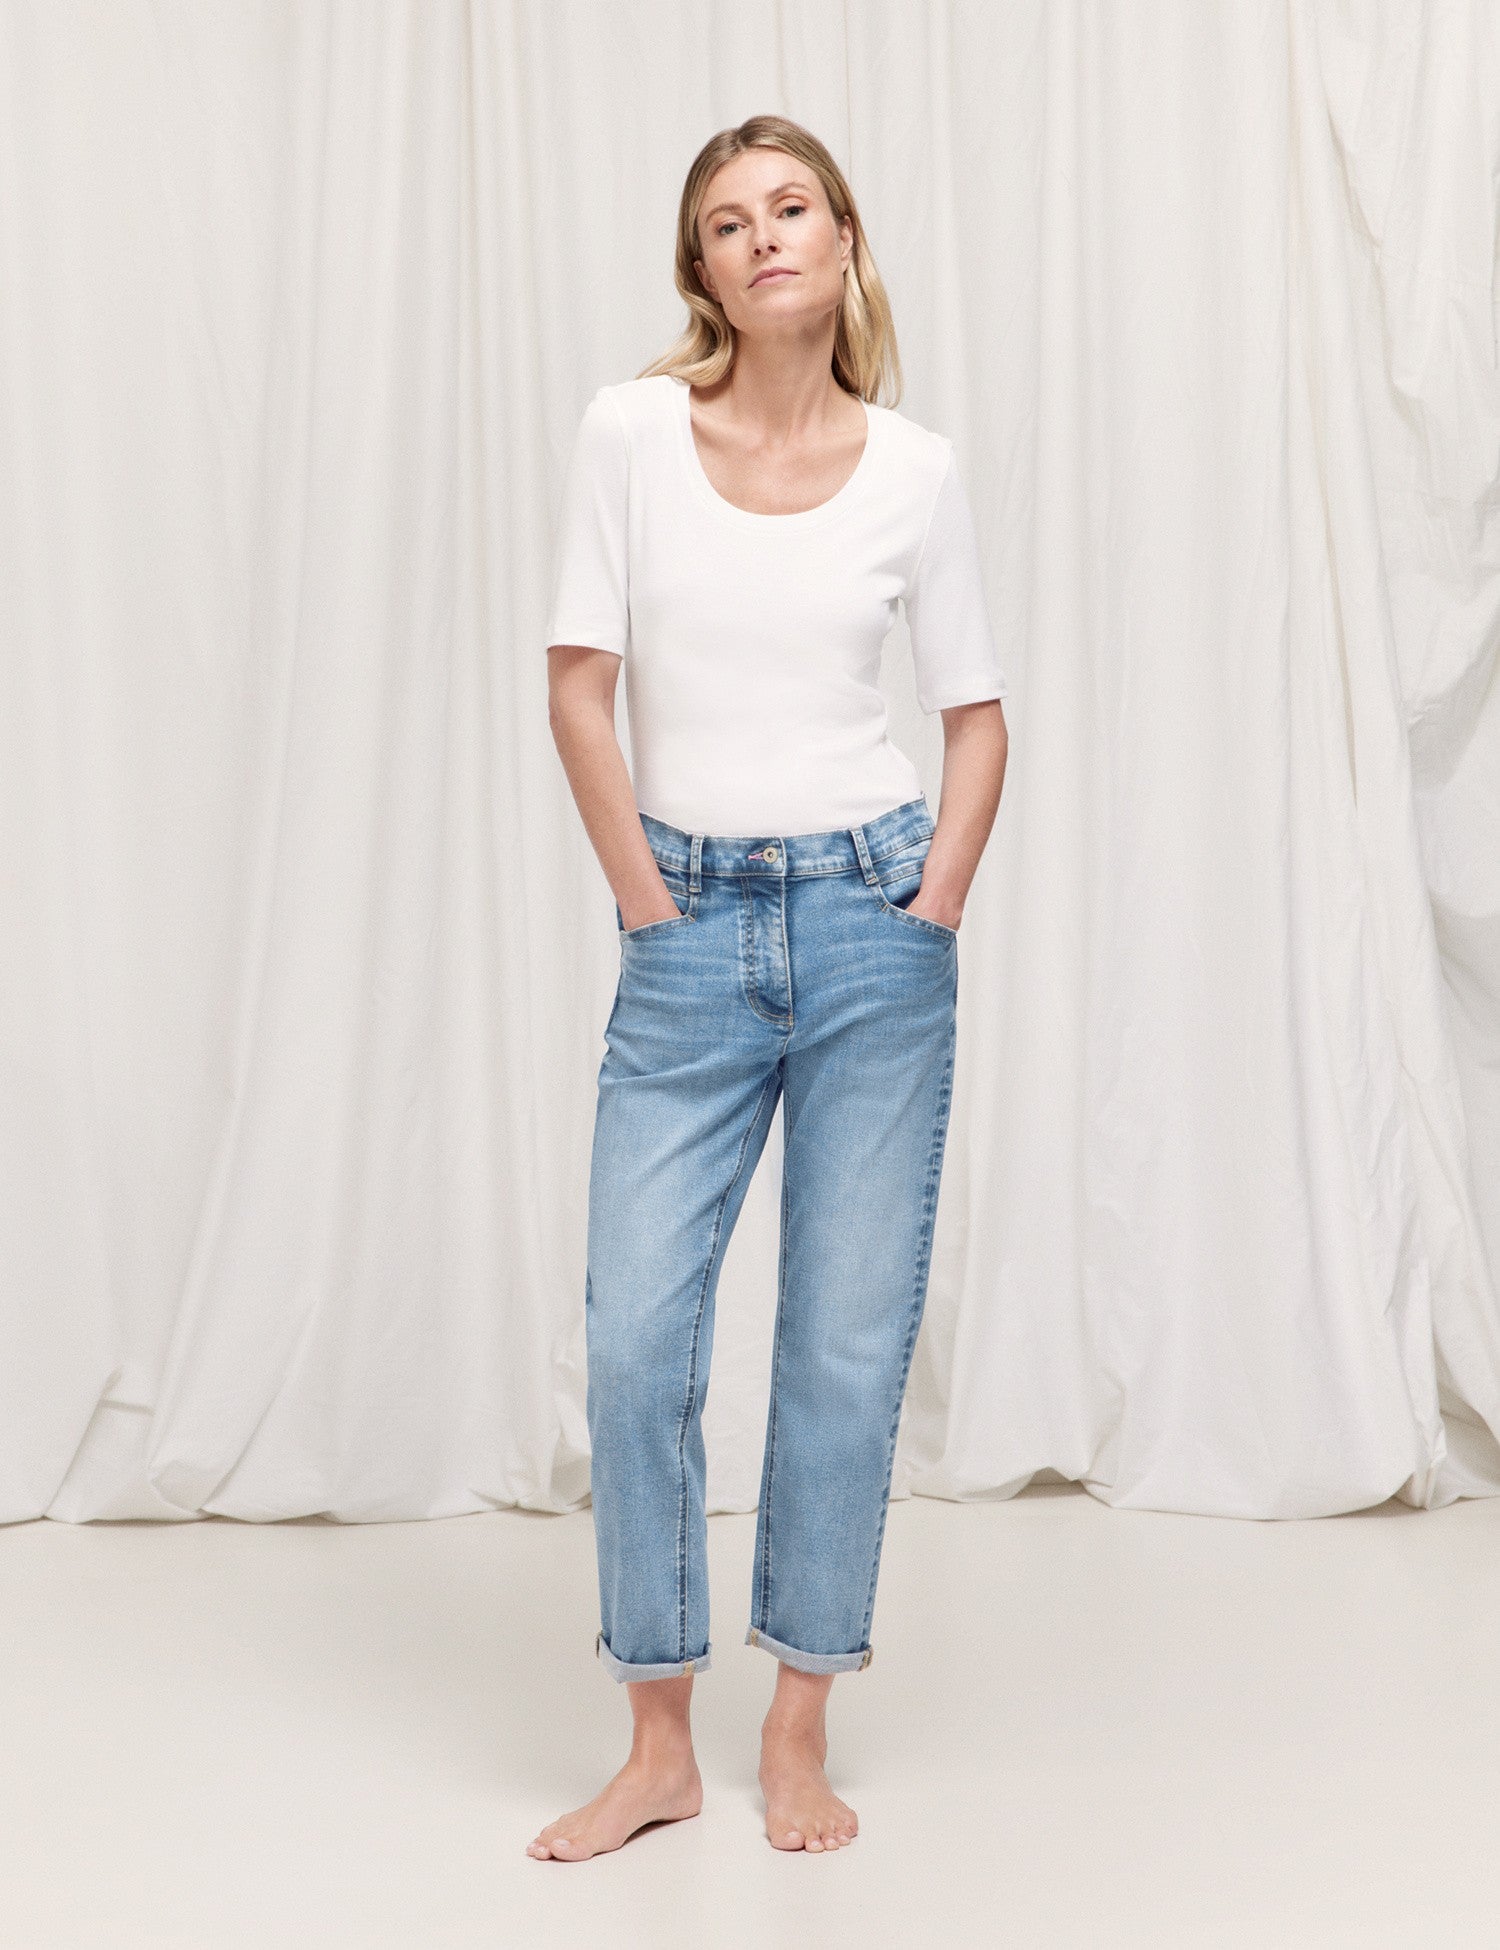 Gerry Weber Relaxed Fit Jeans Blue